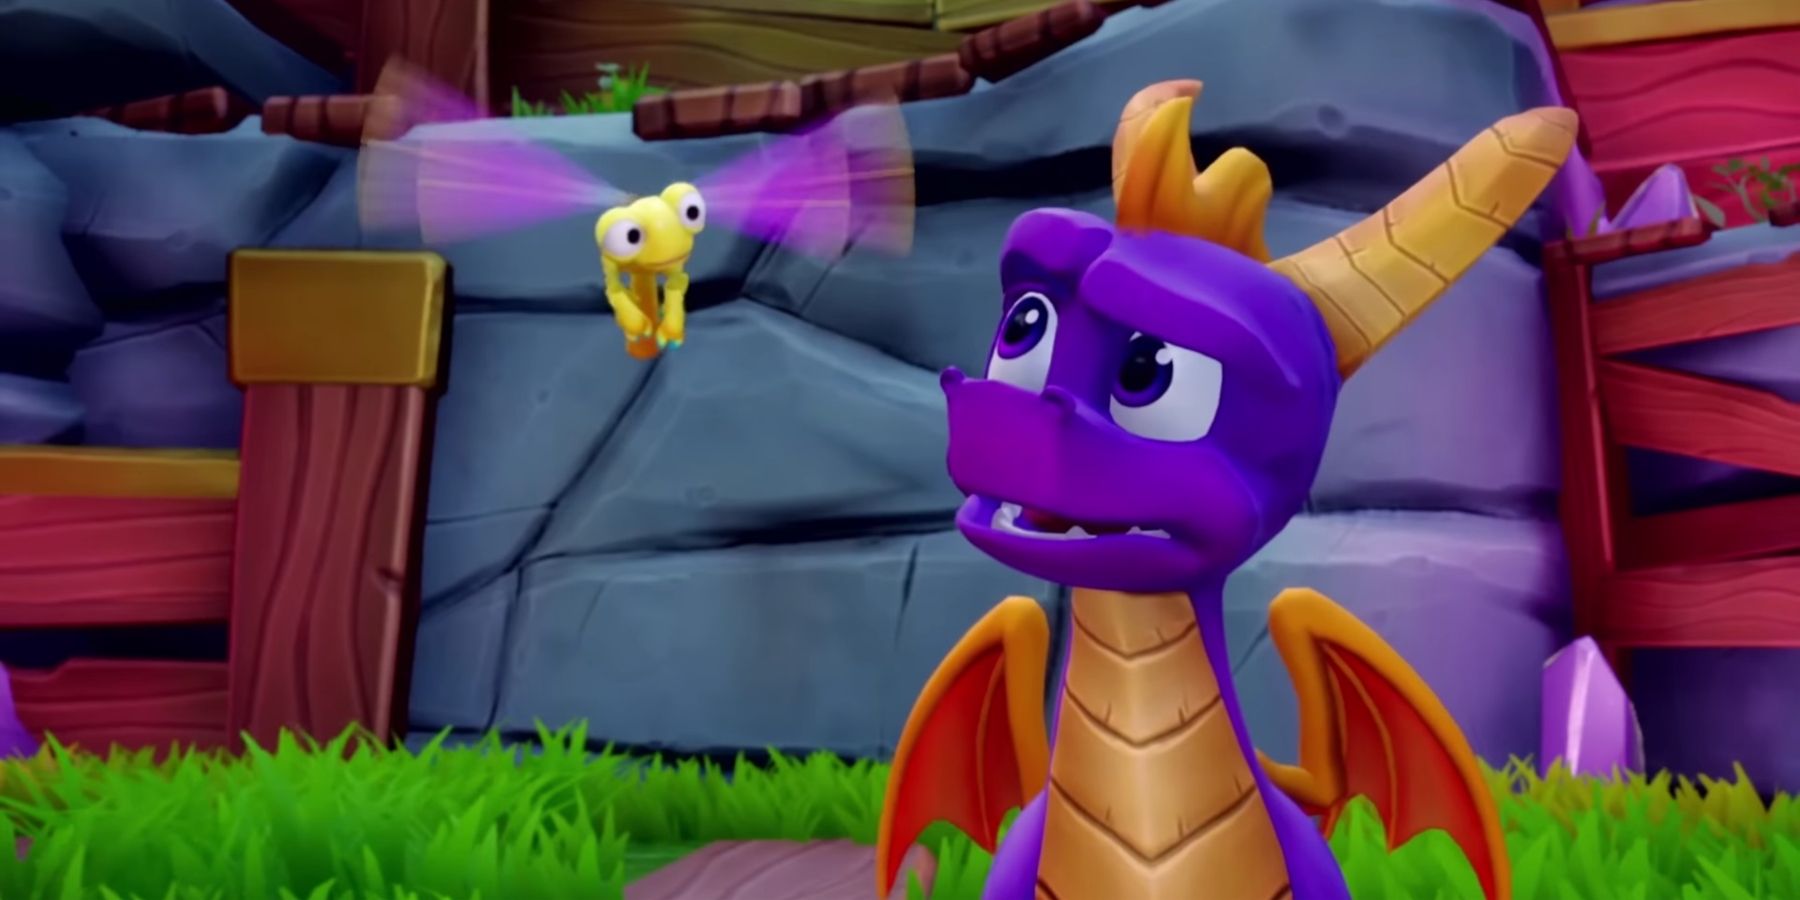 Spyro Relaunched The Spyro And His Confused Friend Trilogy